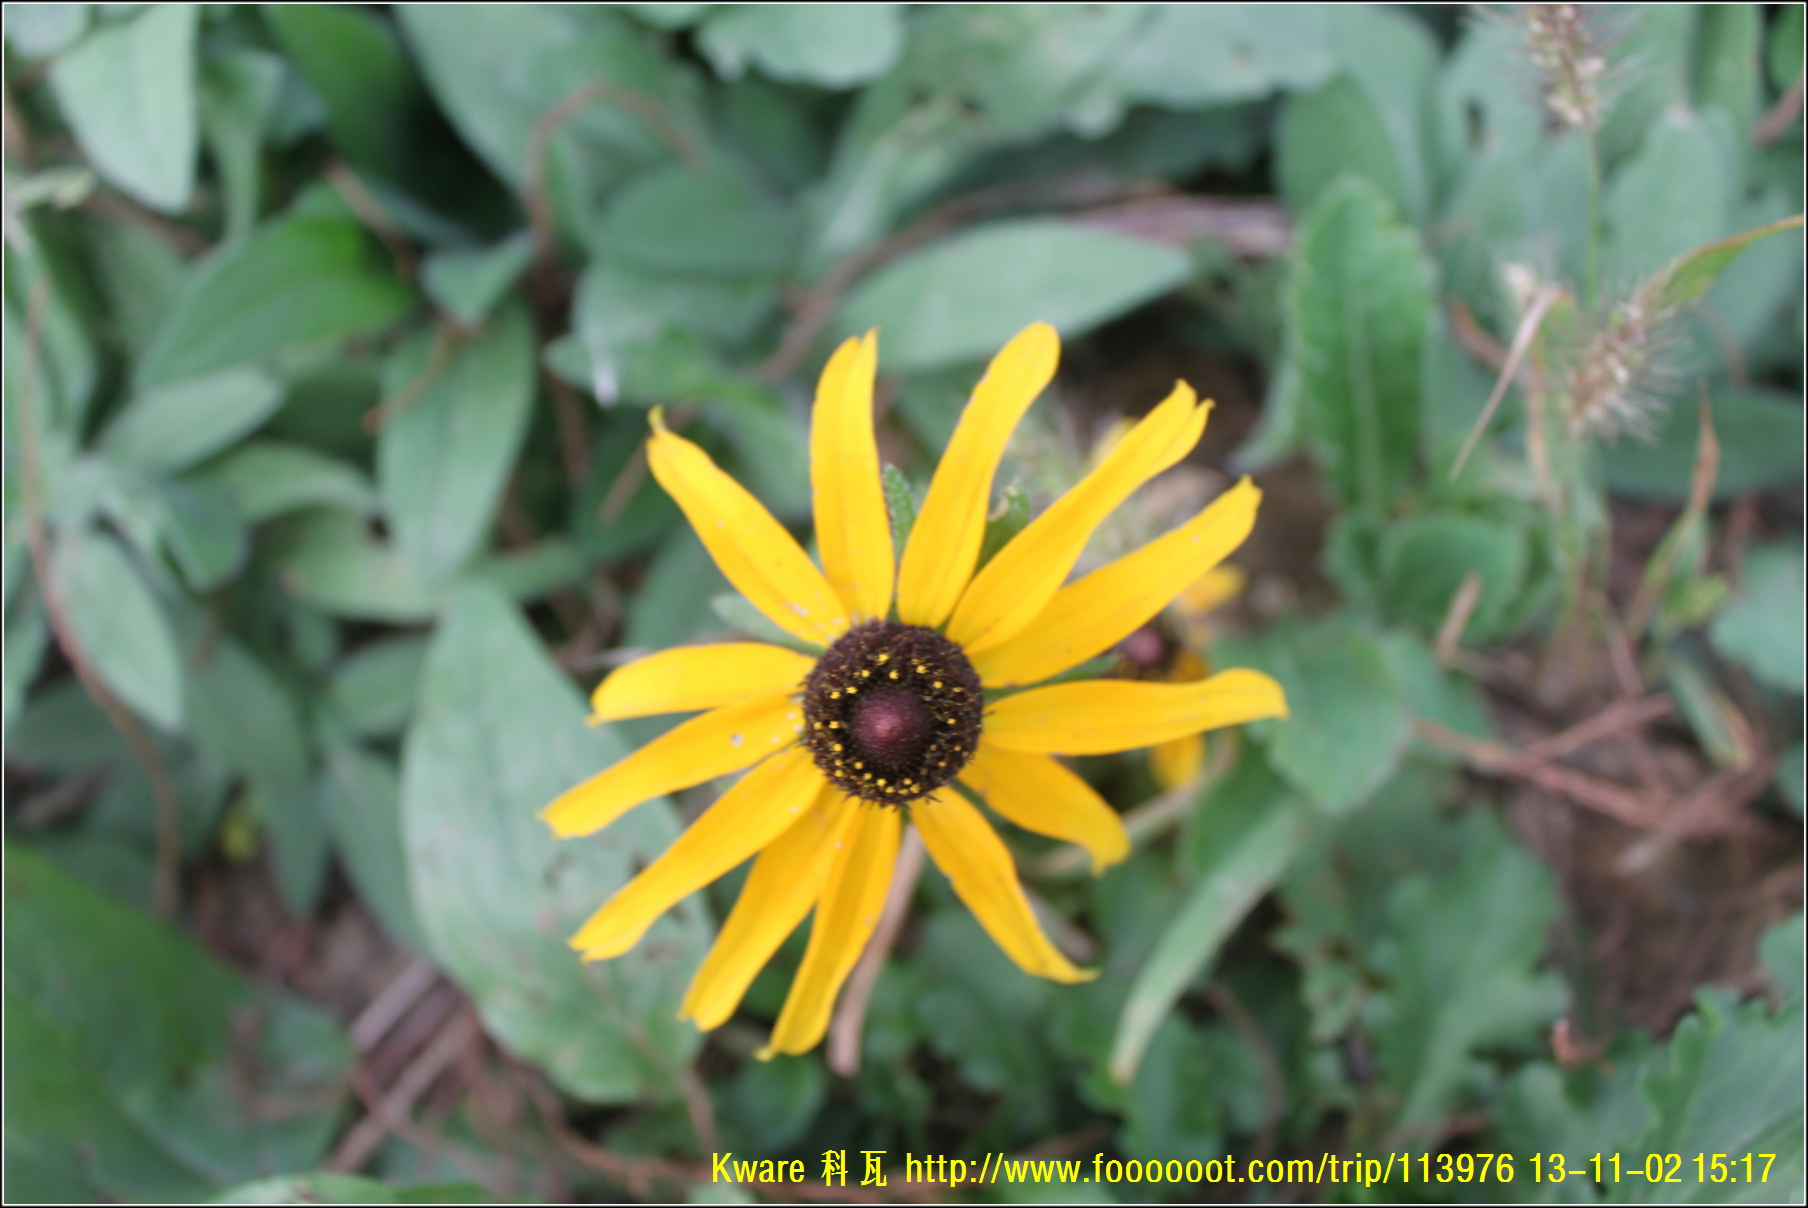 a black - capped yellow flower standing out in the grass